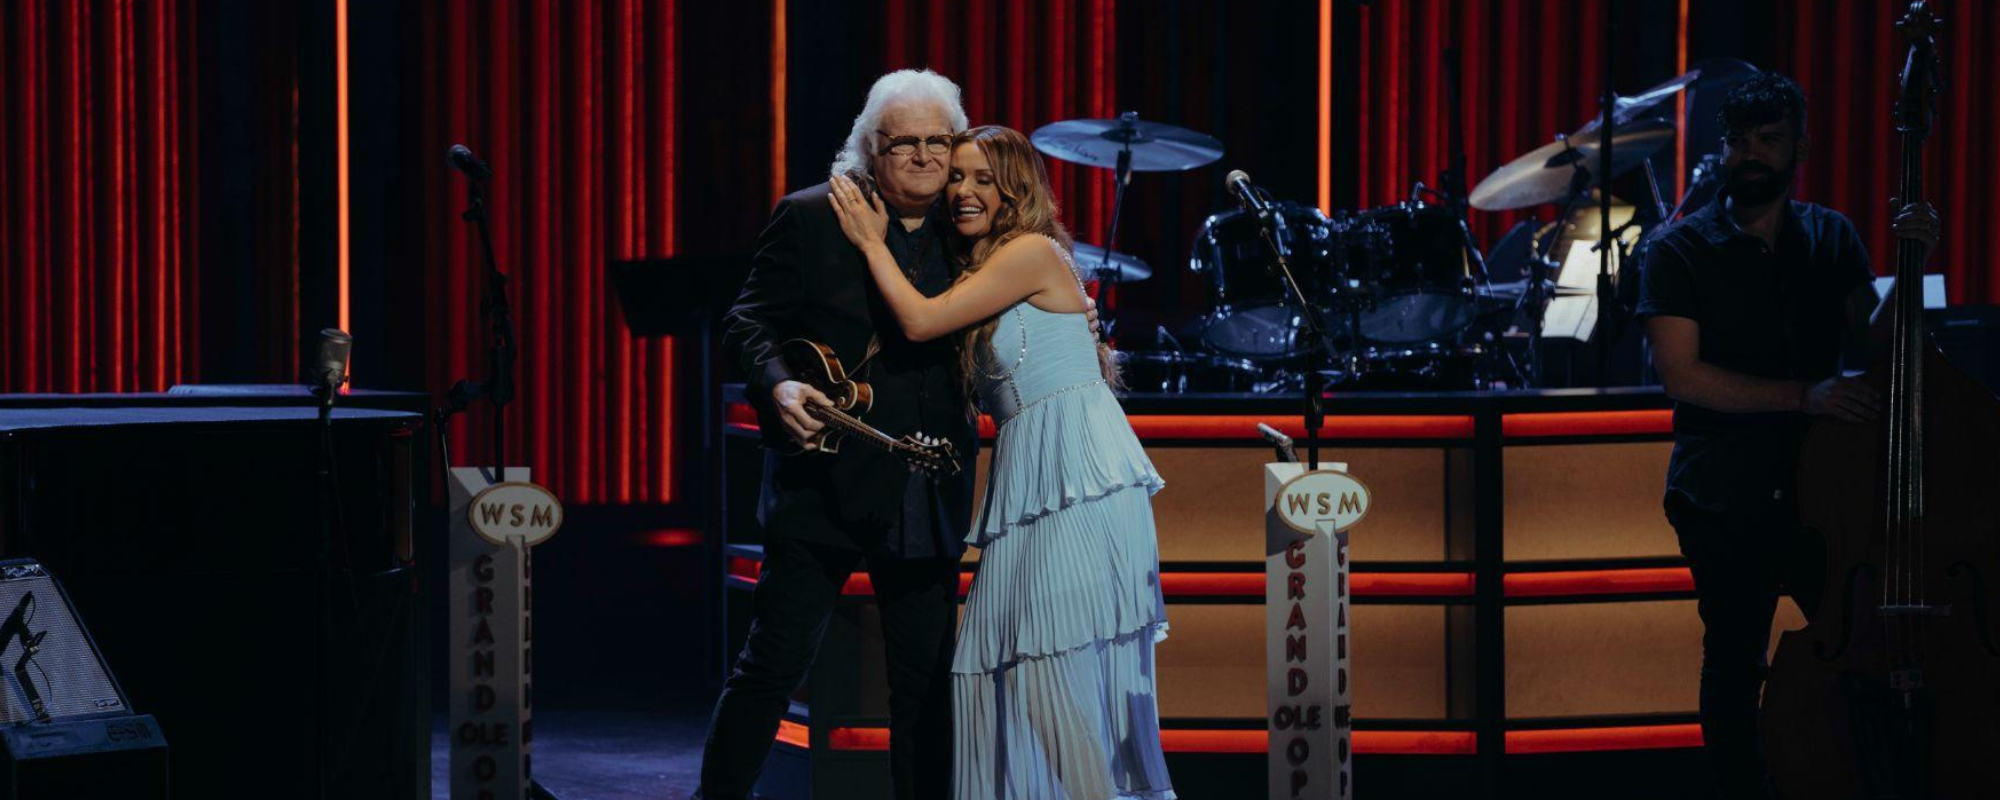 Carly Pearce Celebrates 100th Opry Performance with Special Guests